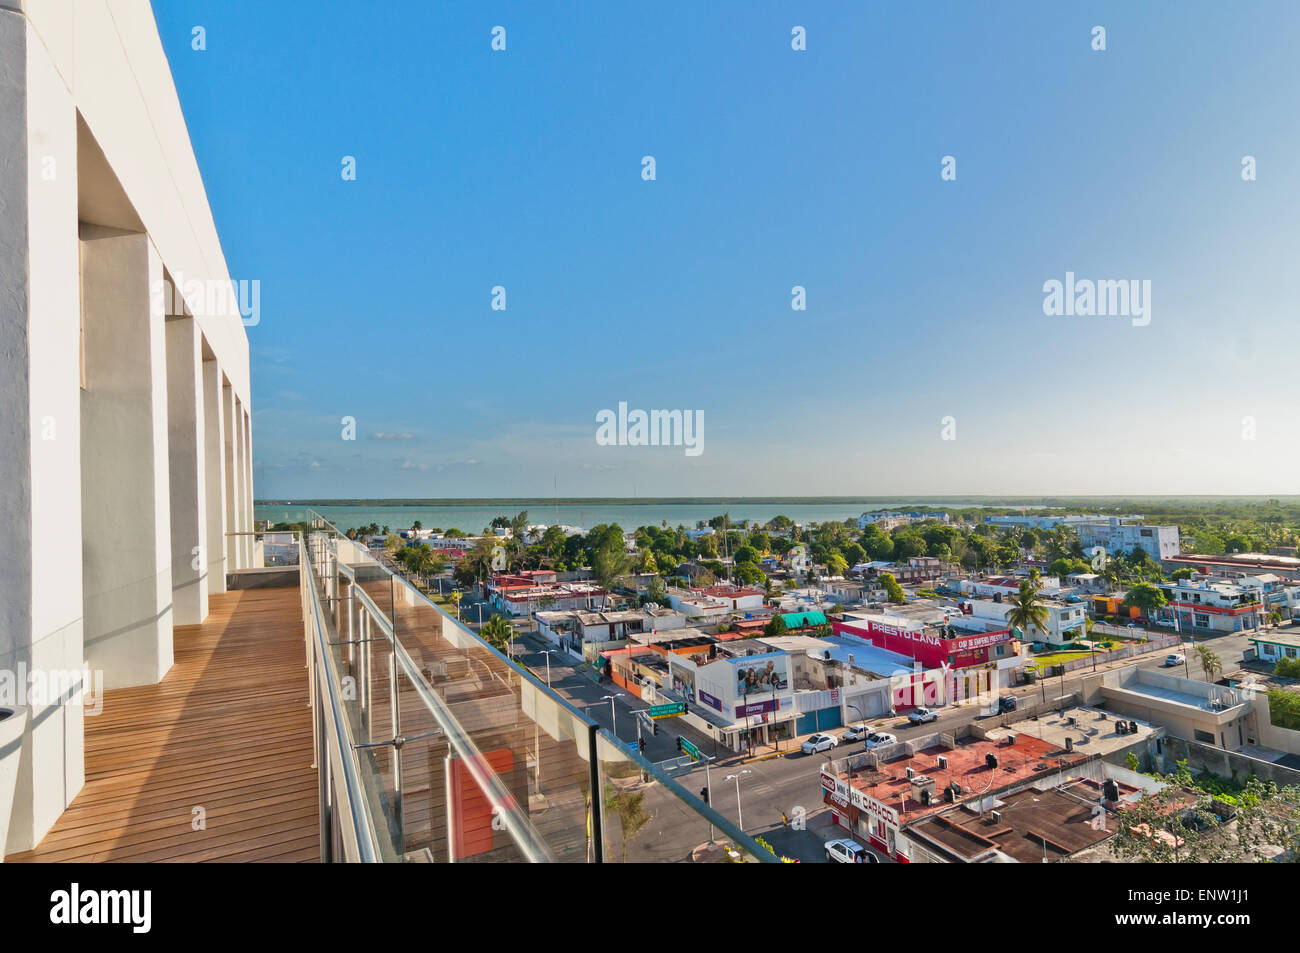 Chetumal, Mexico - April 26, 2014: panoramic view of downtown in Chetumal, Mexico. Chetumal is an important port and operates as Stock Photo